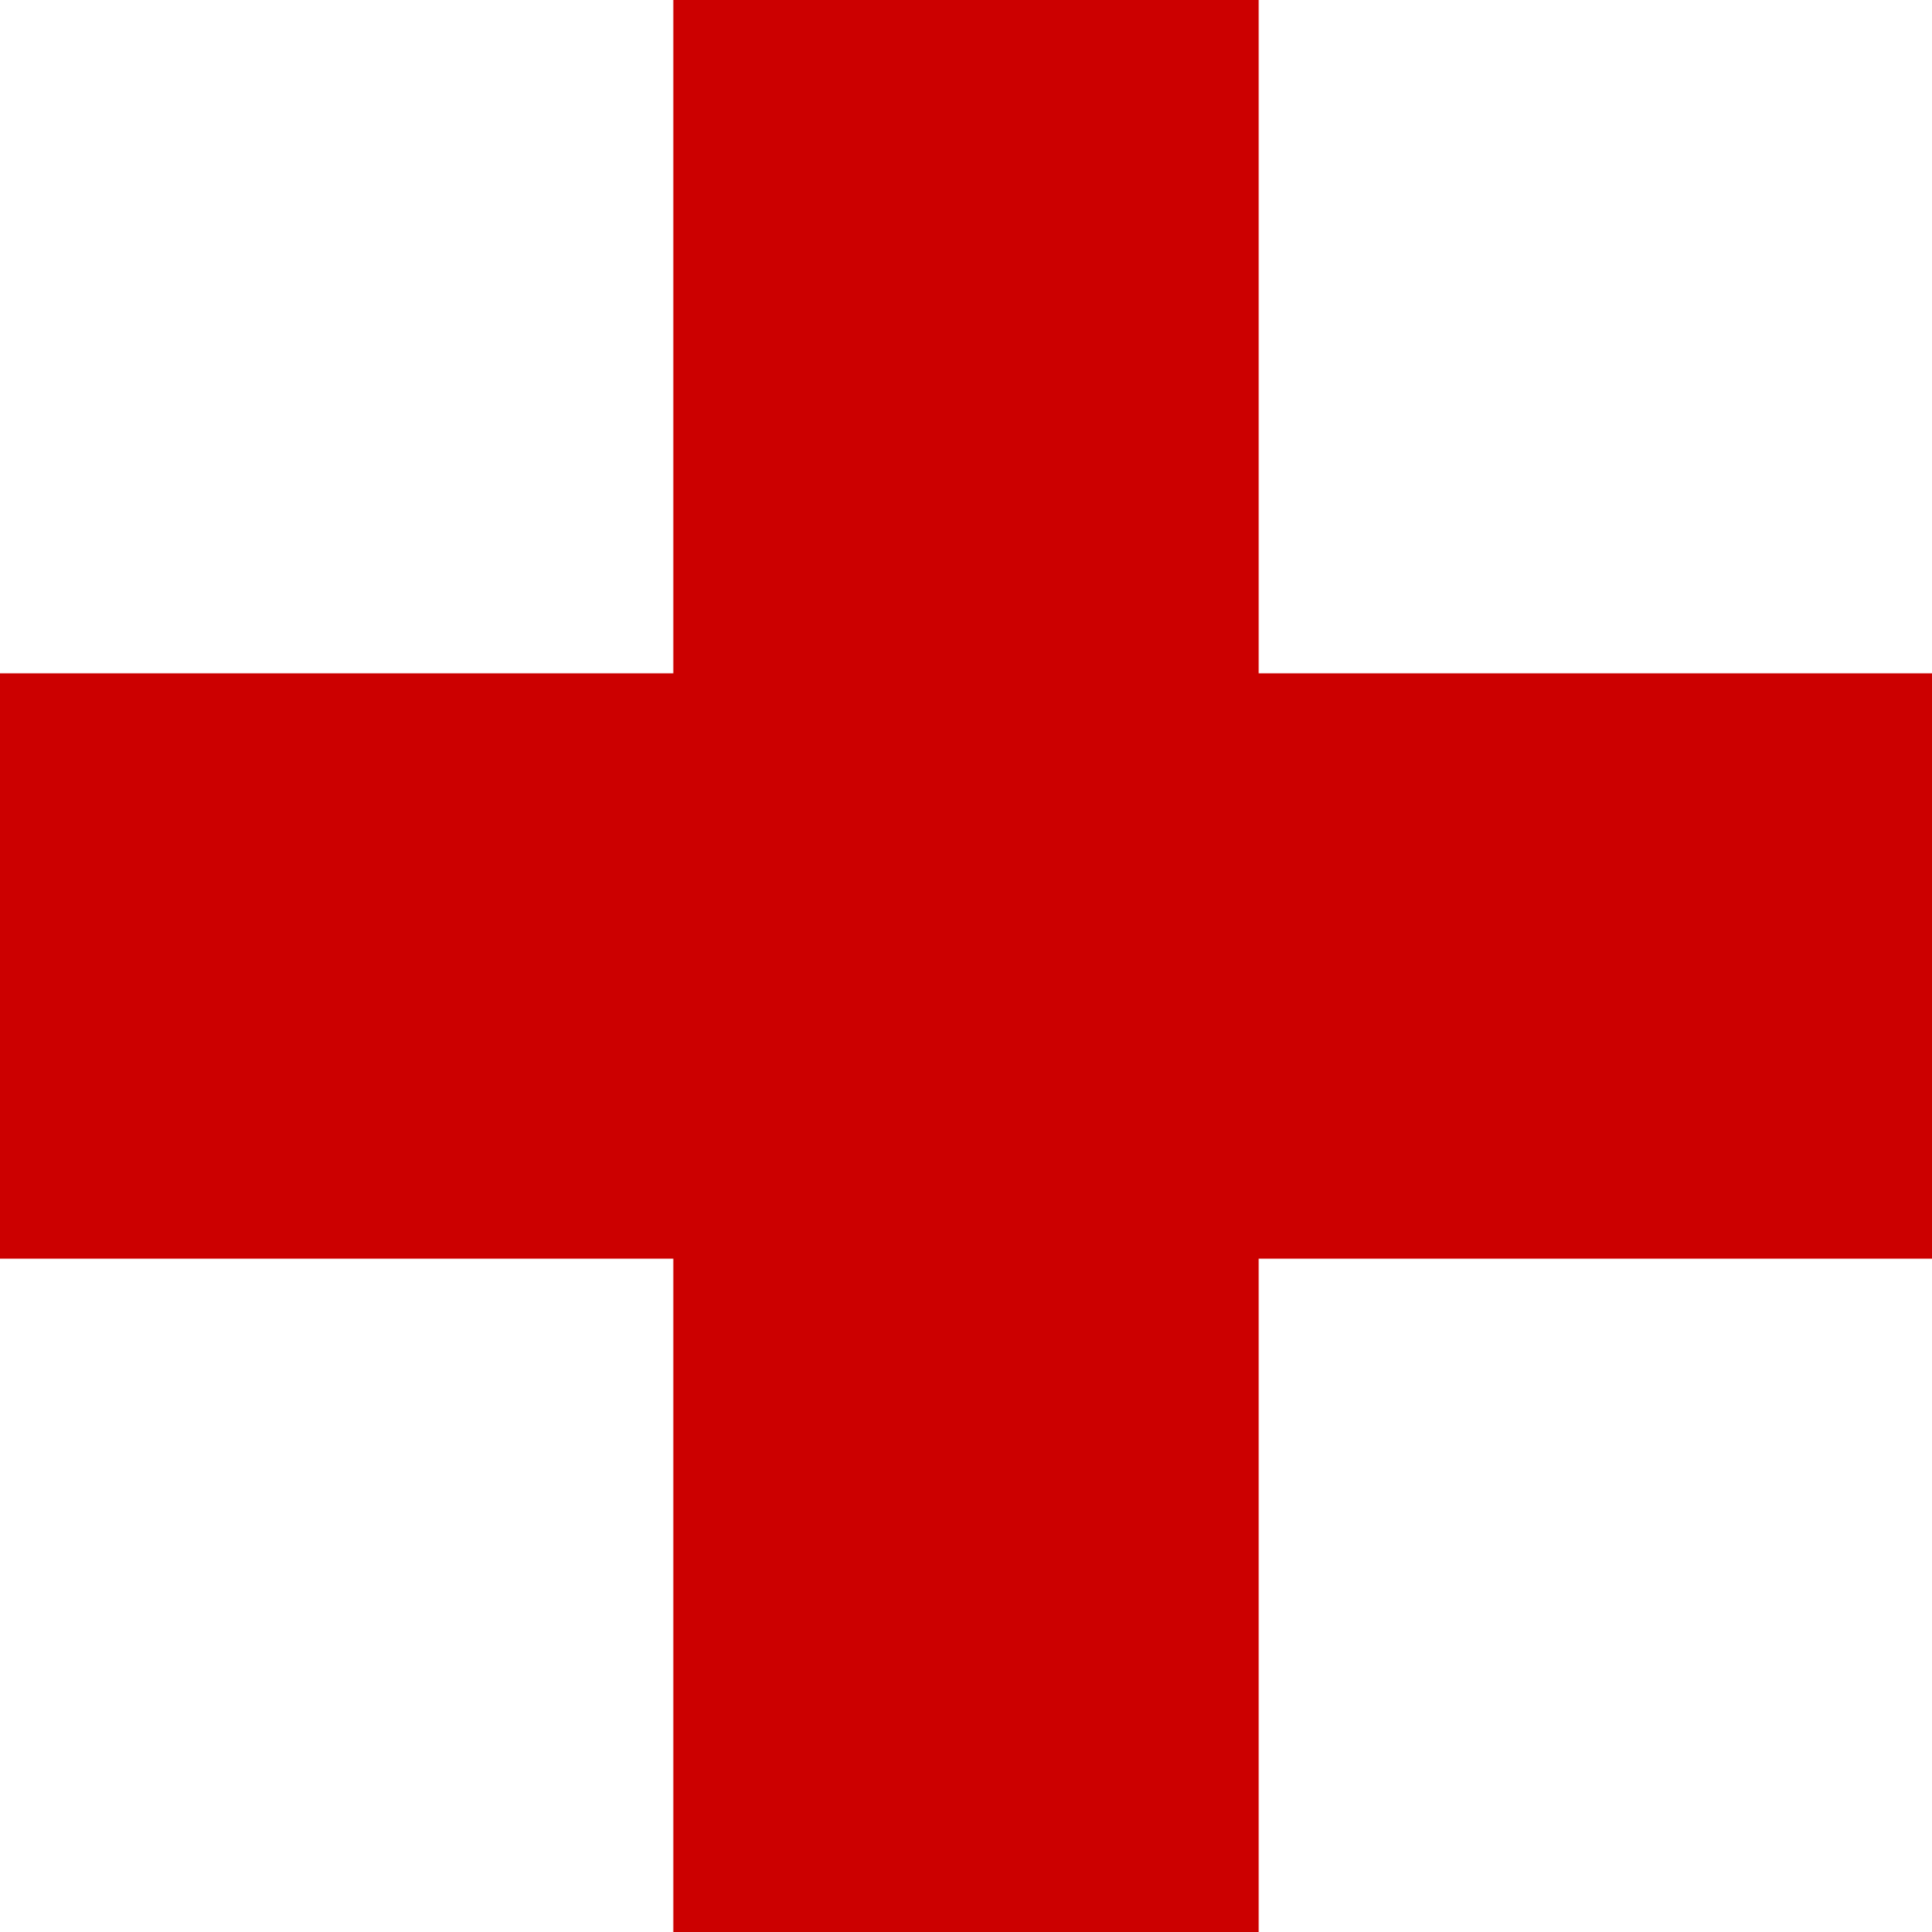 https://upload.wikimedia.org/wikipedia/commons/thumb/e/ee/Red_Cross_icon.svg/2048px-Red_Cross_icon.svg.png